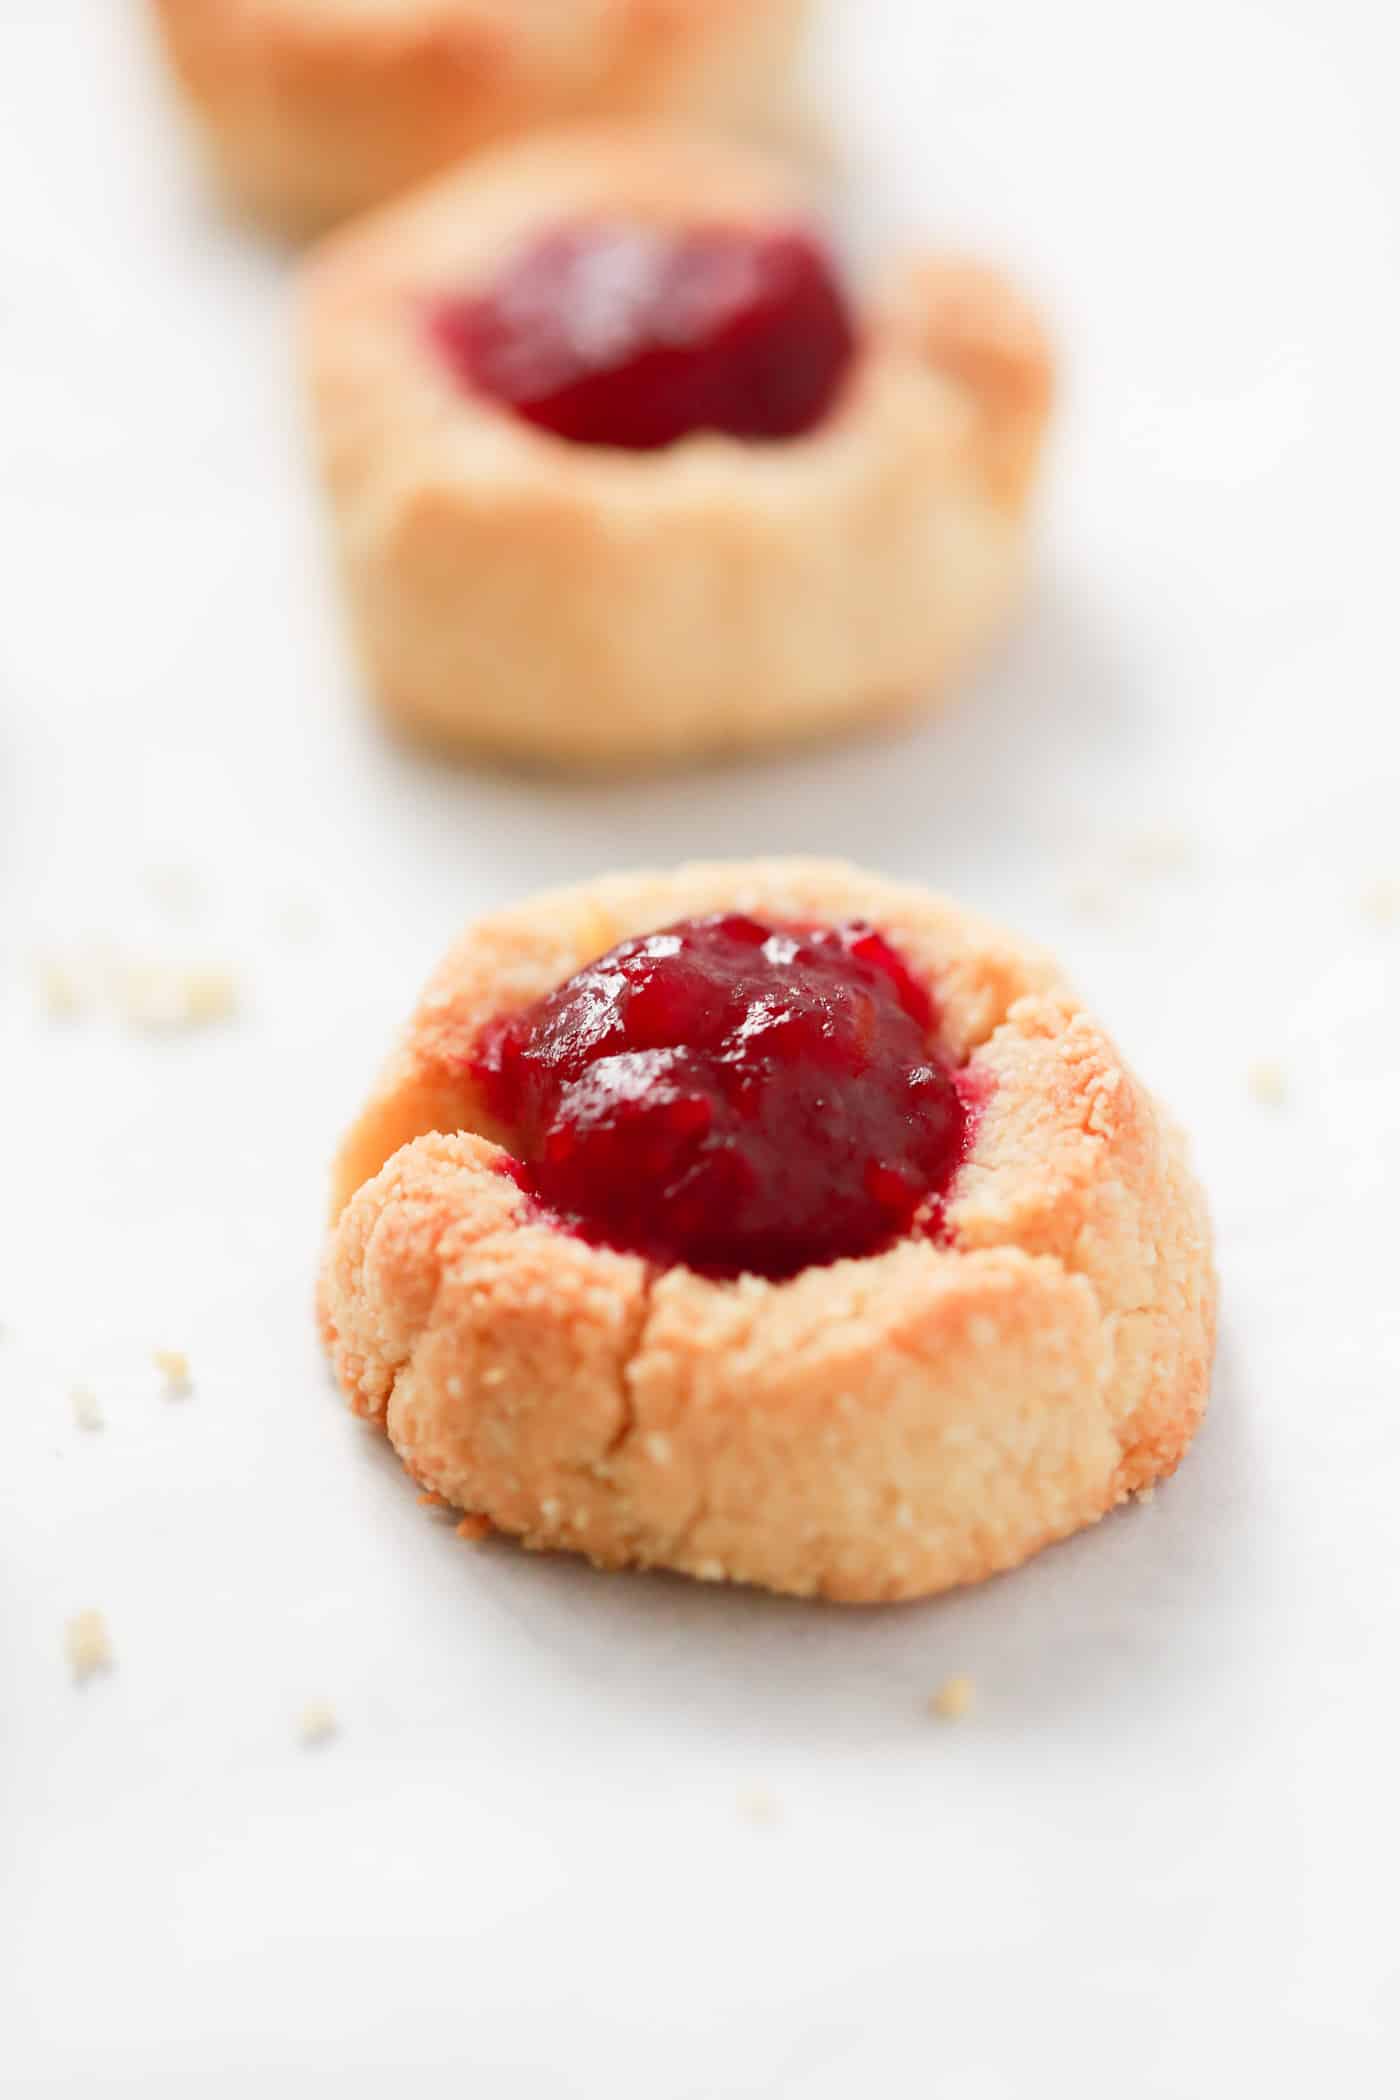 Delicious Low-carb Cranberry Thumbprint Cookies made with almond flour, butter, vanilla extract, natural sweetener and homemade cranberry sauce/jam. It’s gluten-free, sugar-free and tastes amazing!